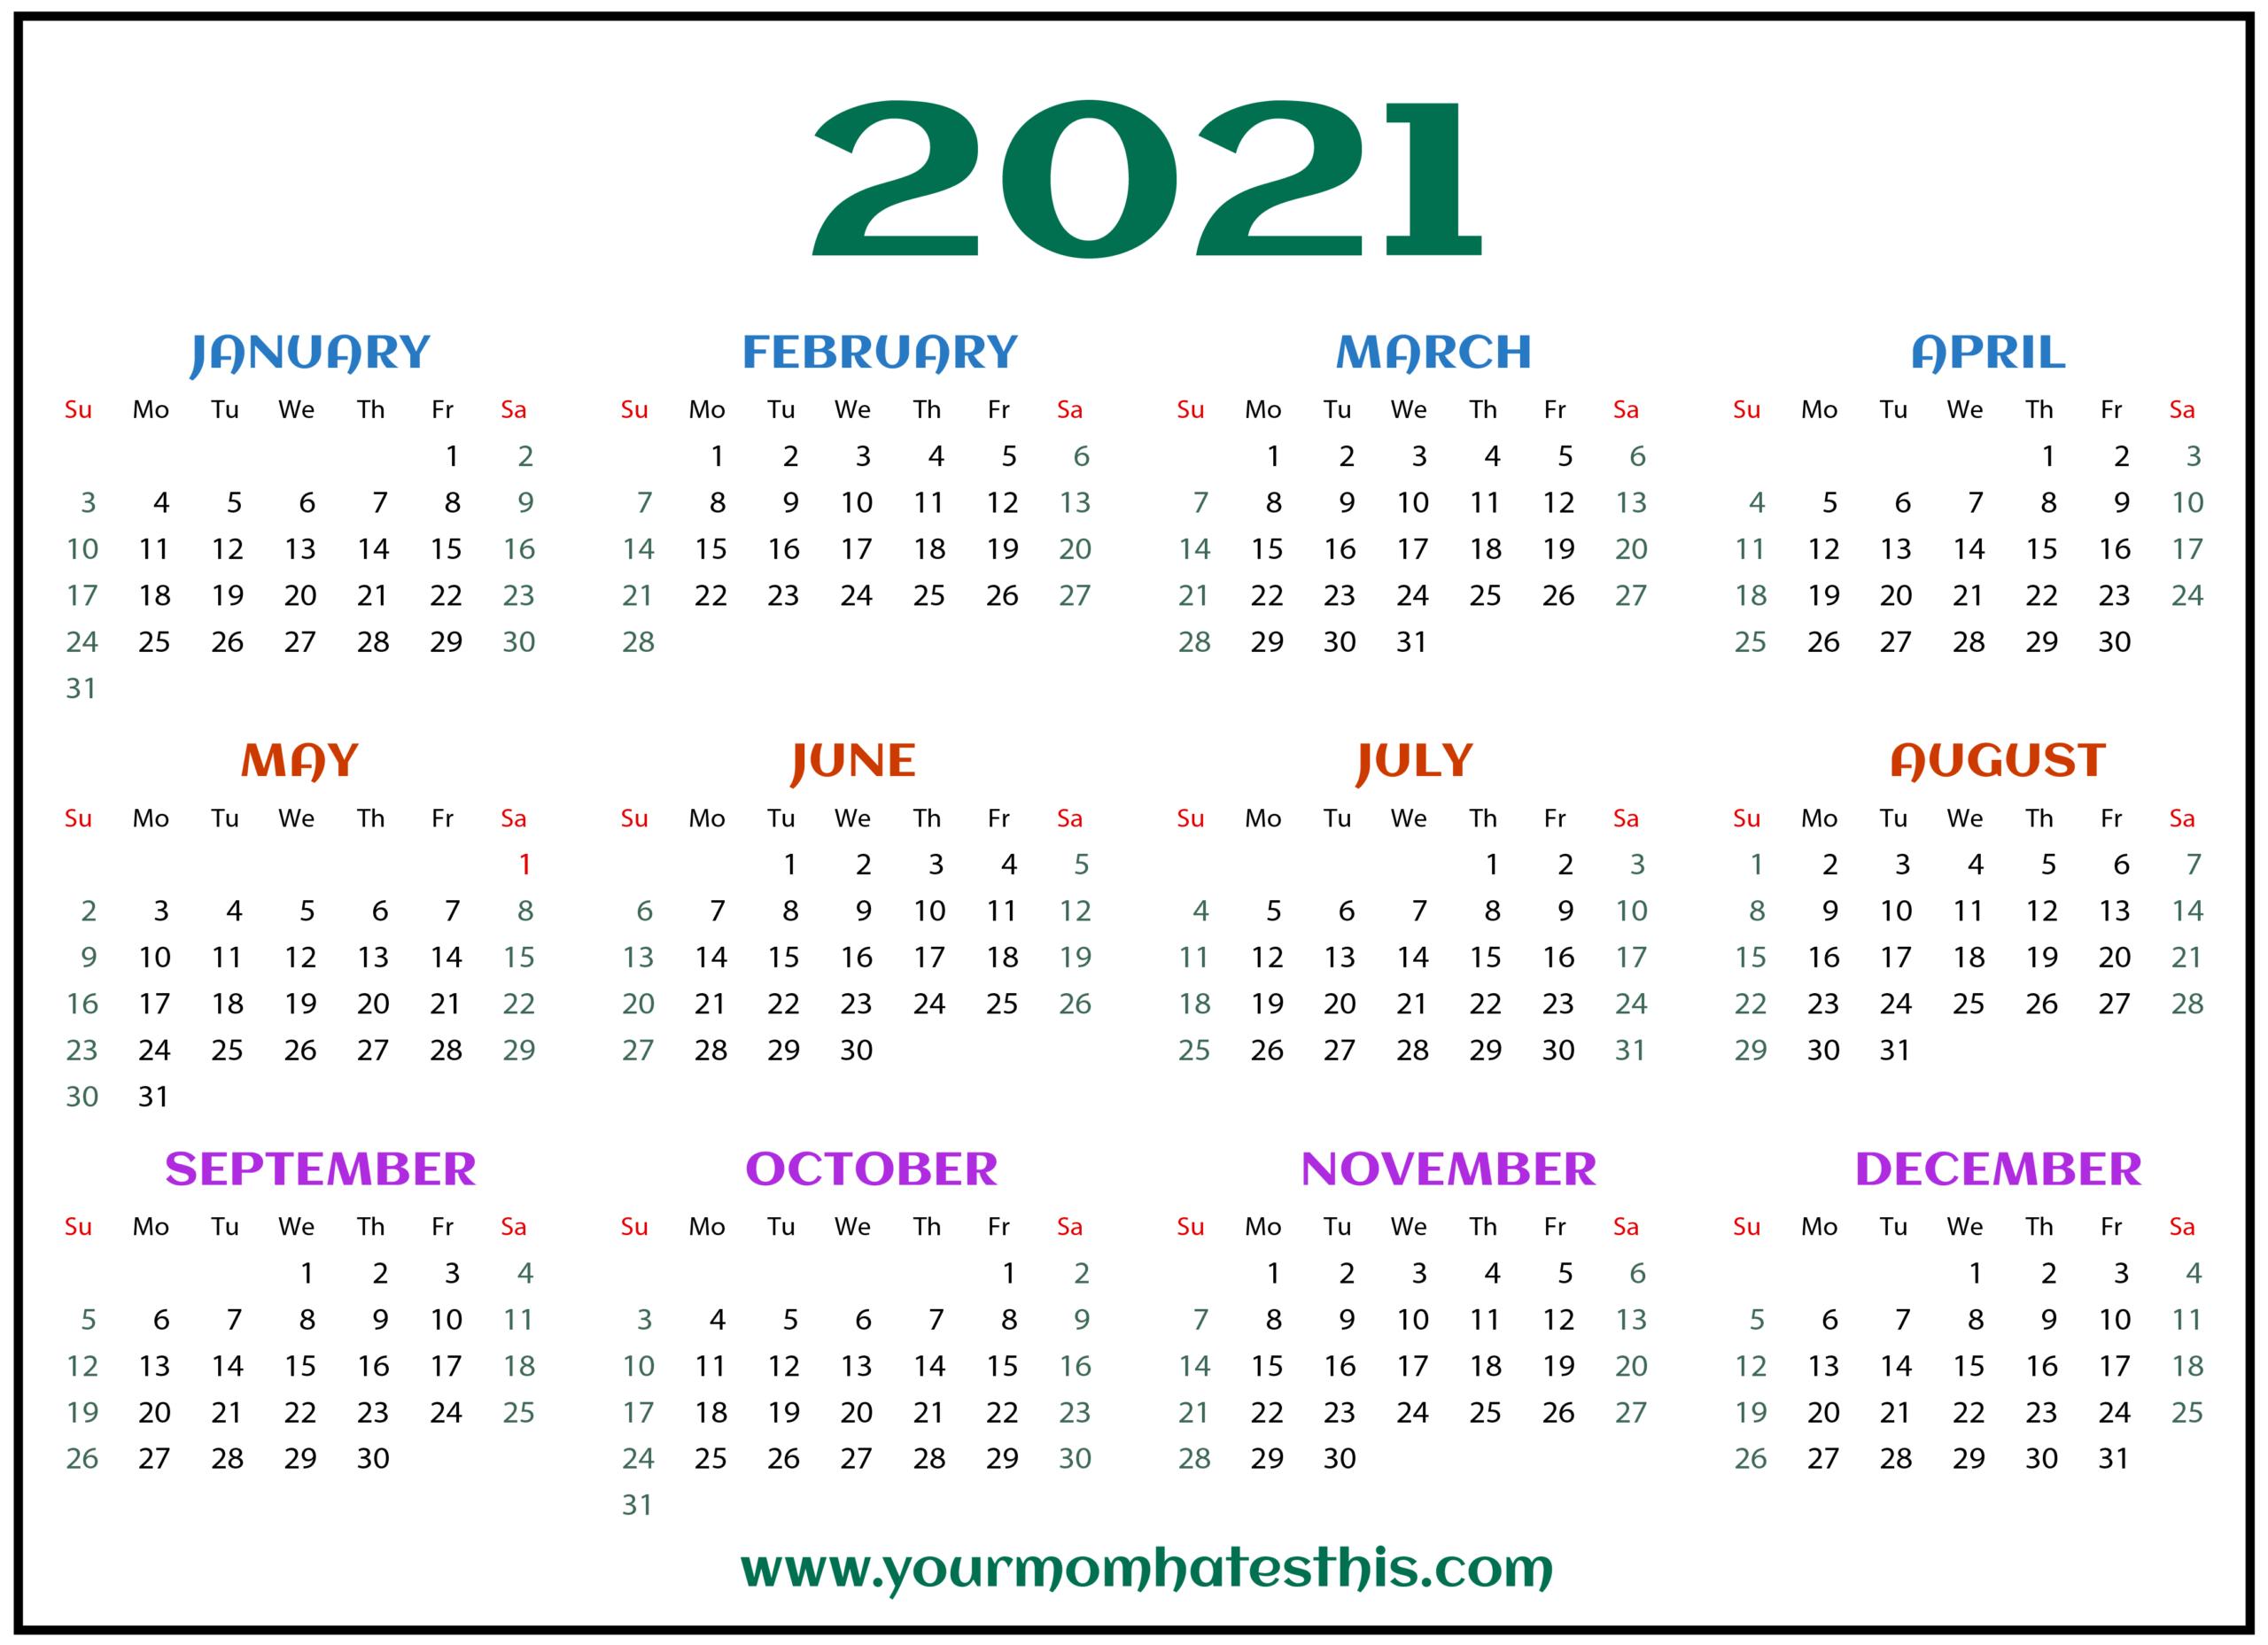 Get 2021 Calendars For Business Purposes